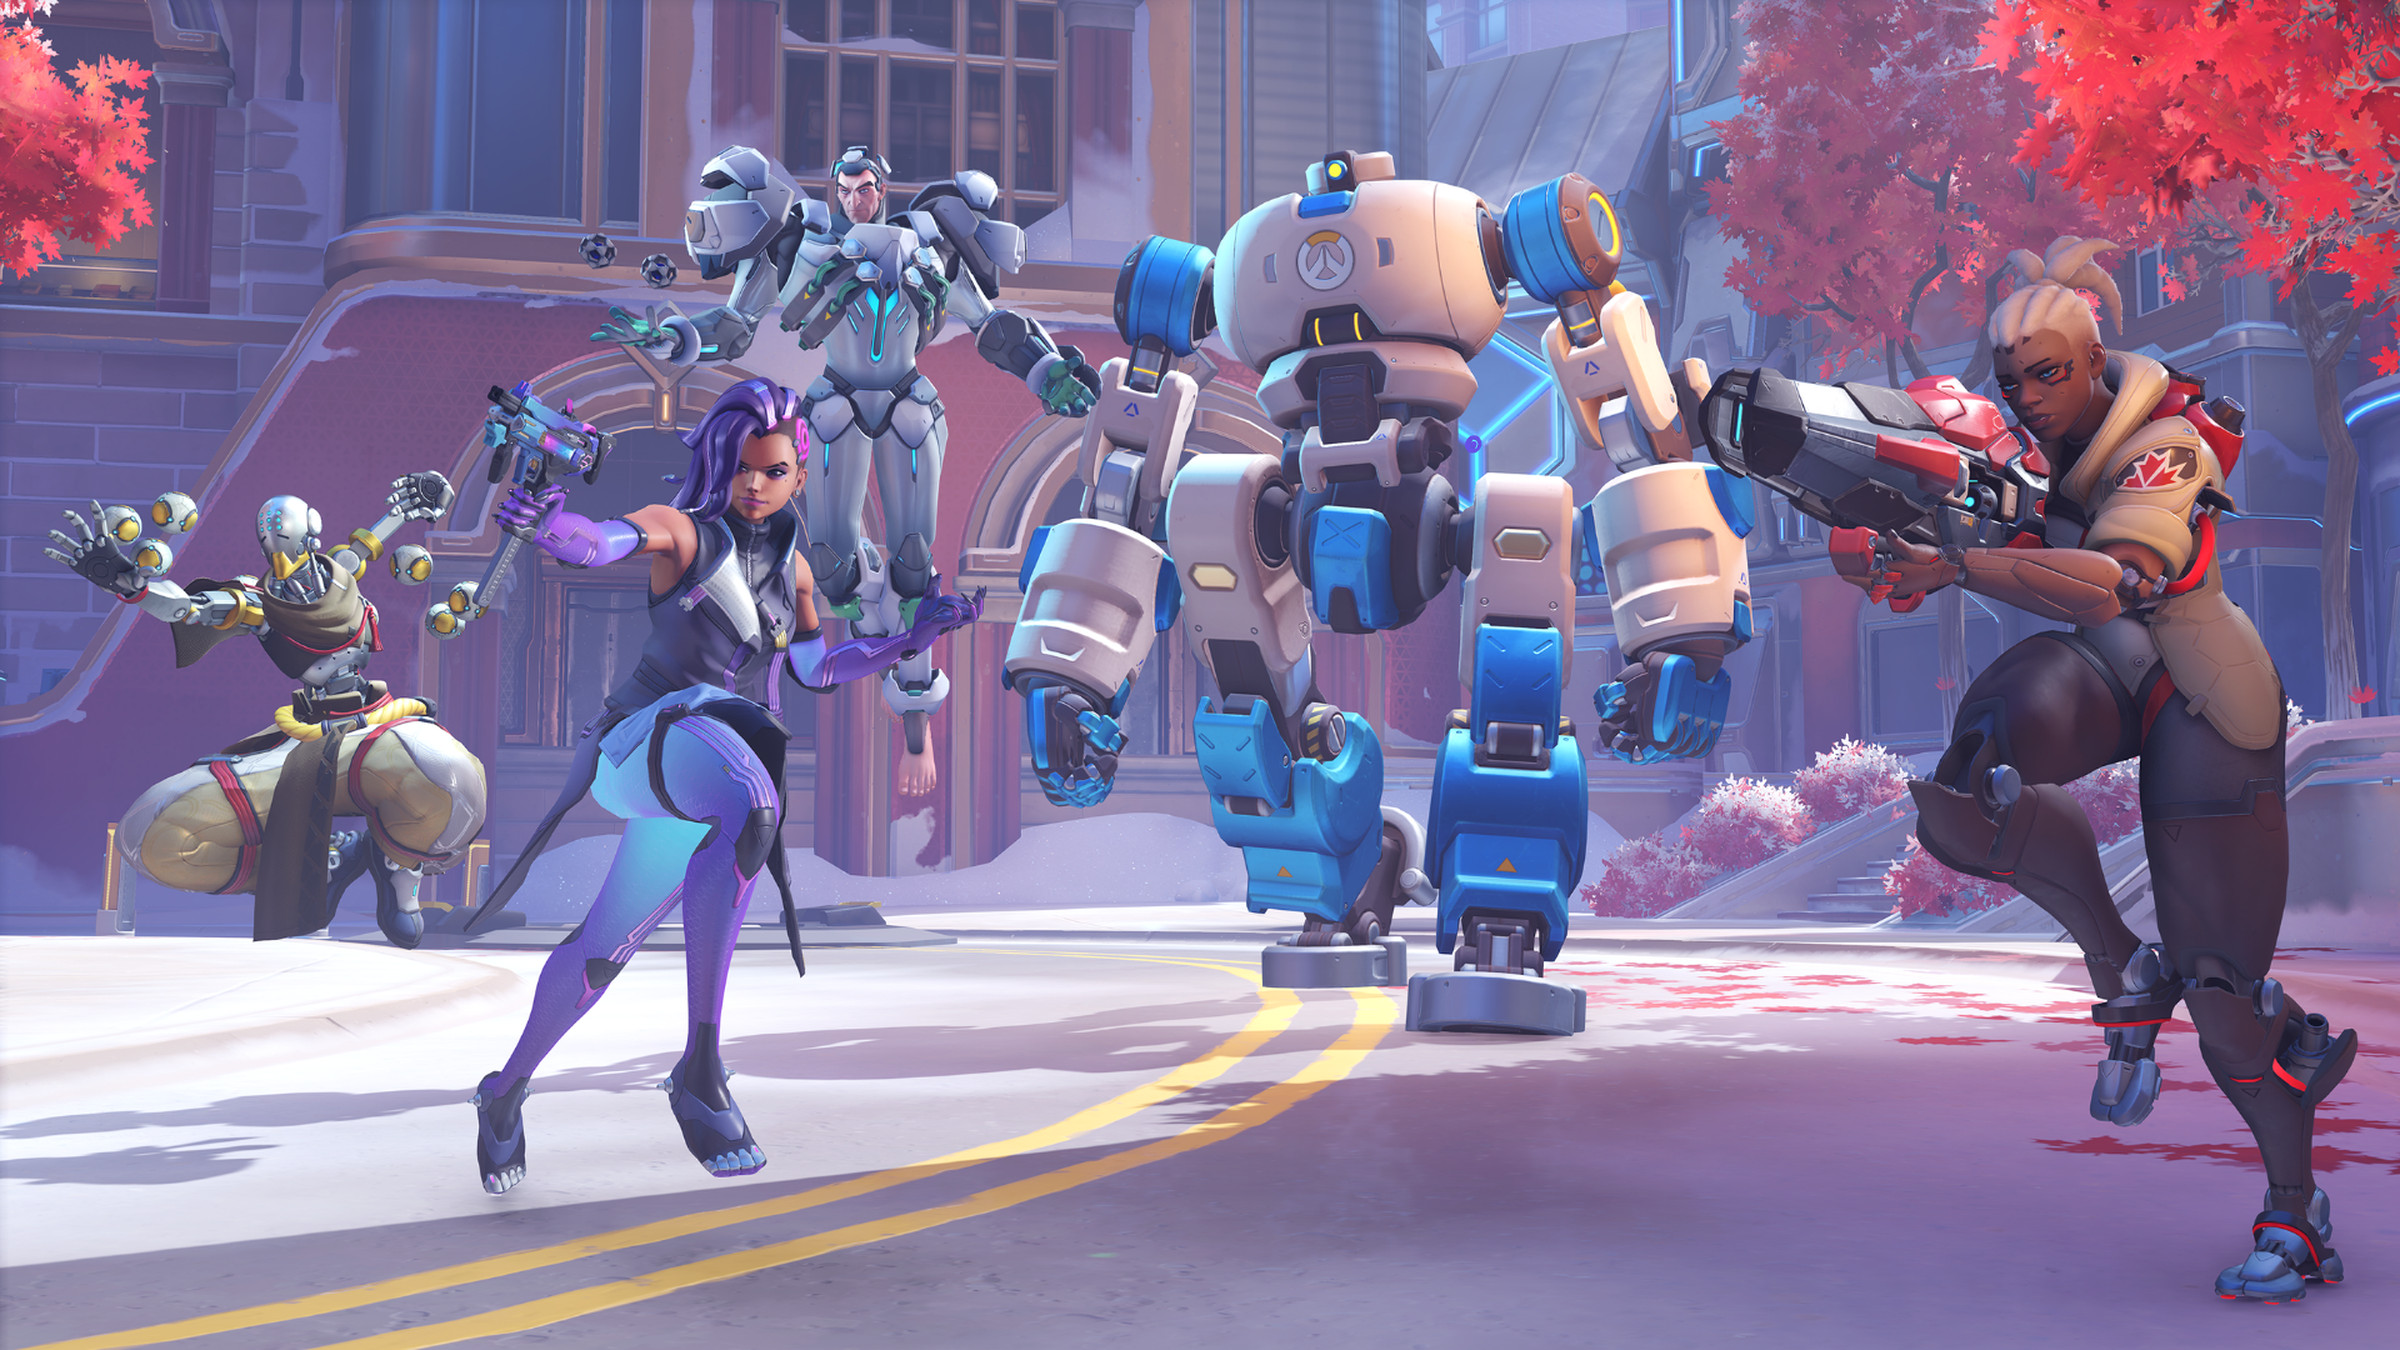 Screenshot from Overwatch 2 displaying the newest map type, Push featuring several Overwatch 2 heroes from left to right Zenyatta, Sigma, Sombra, and Sojourn flanking a bulky and slow robot designed to push barricades.